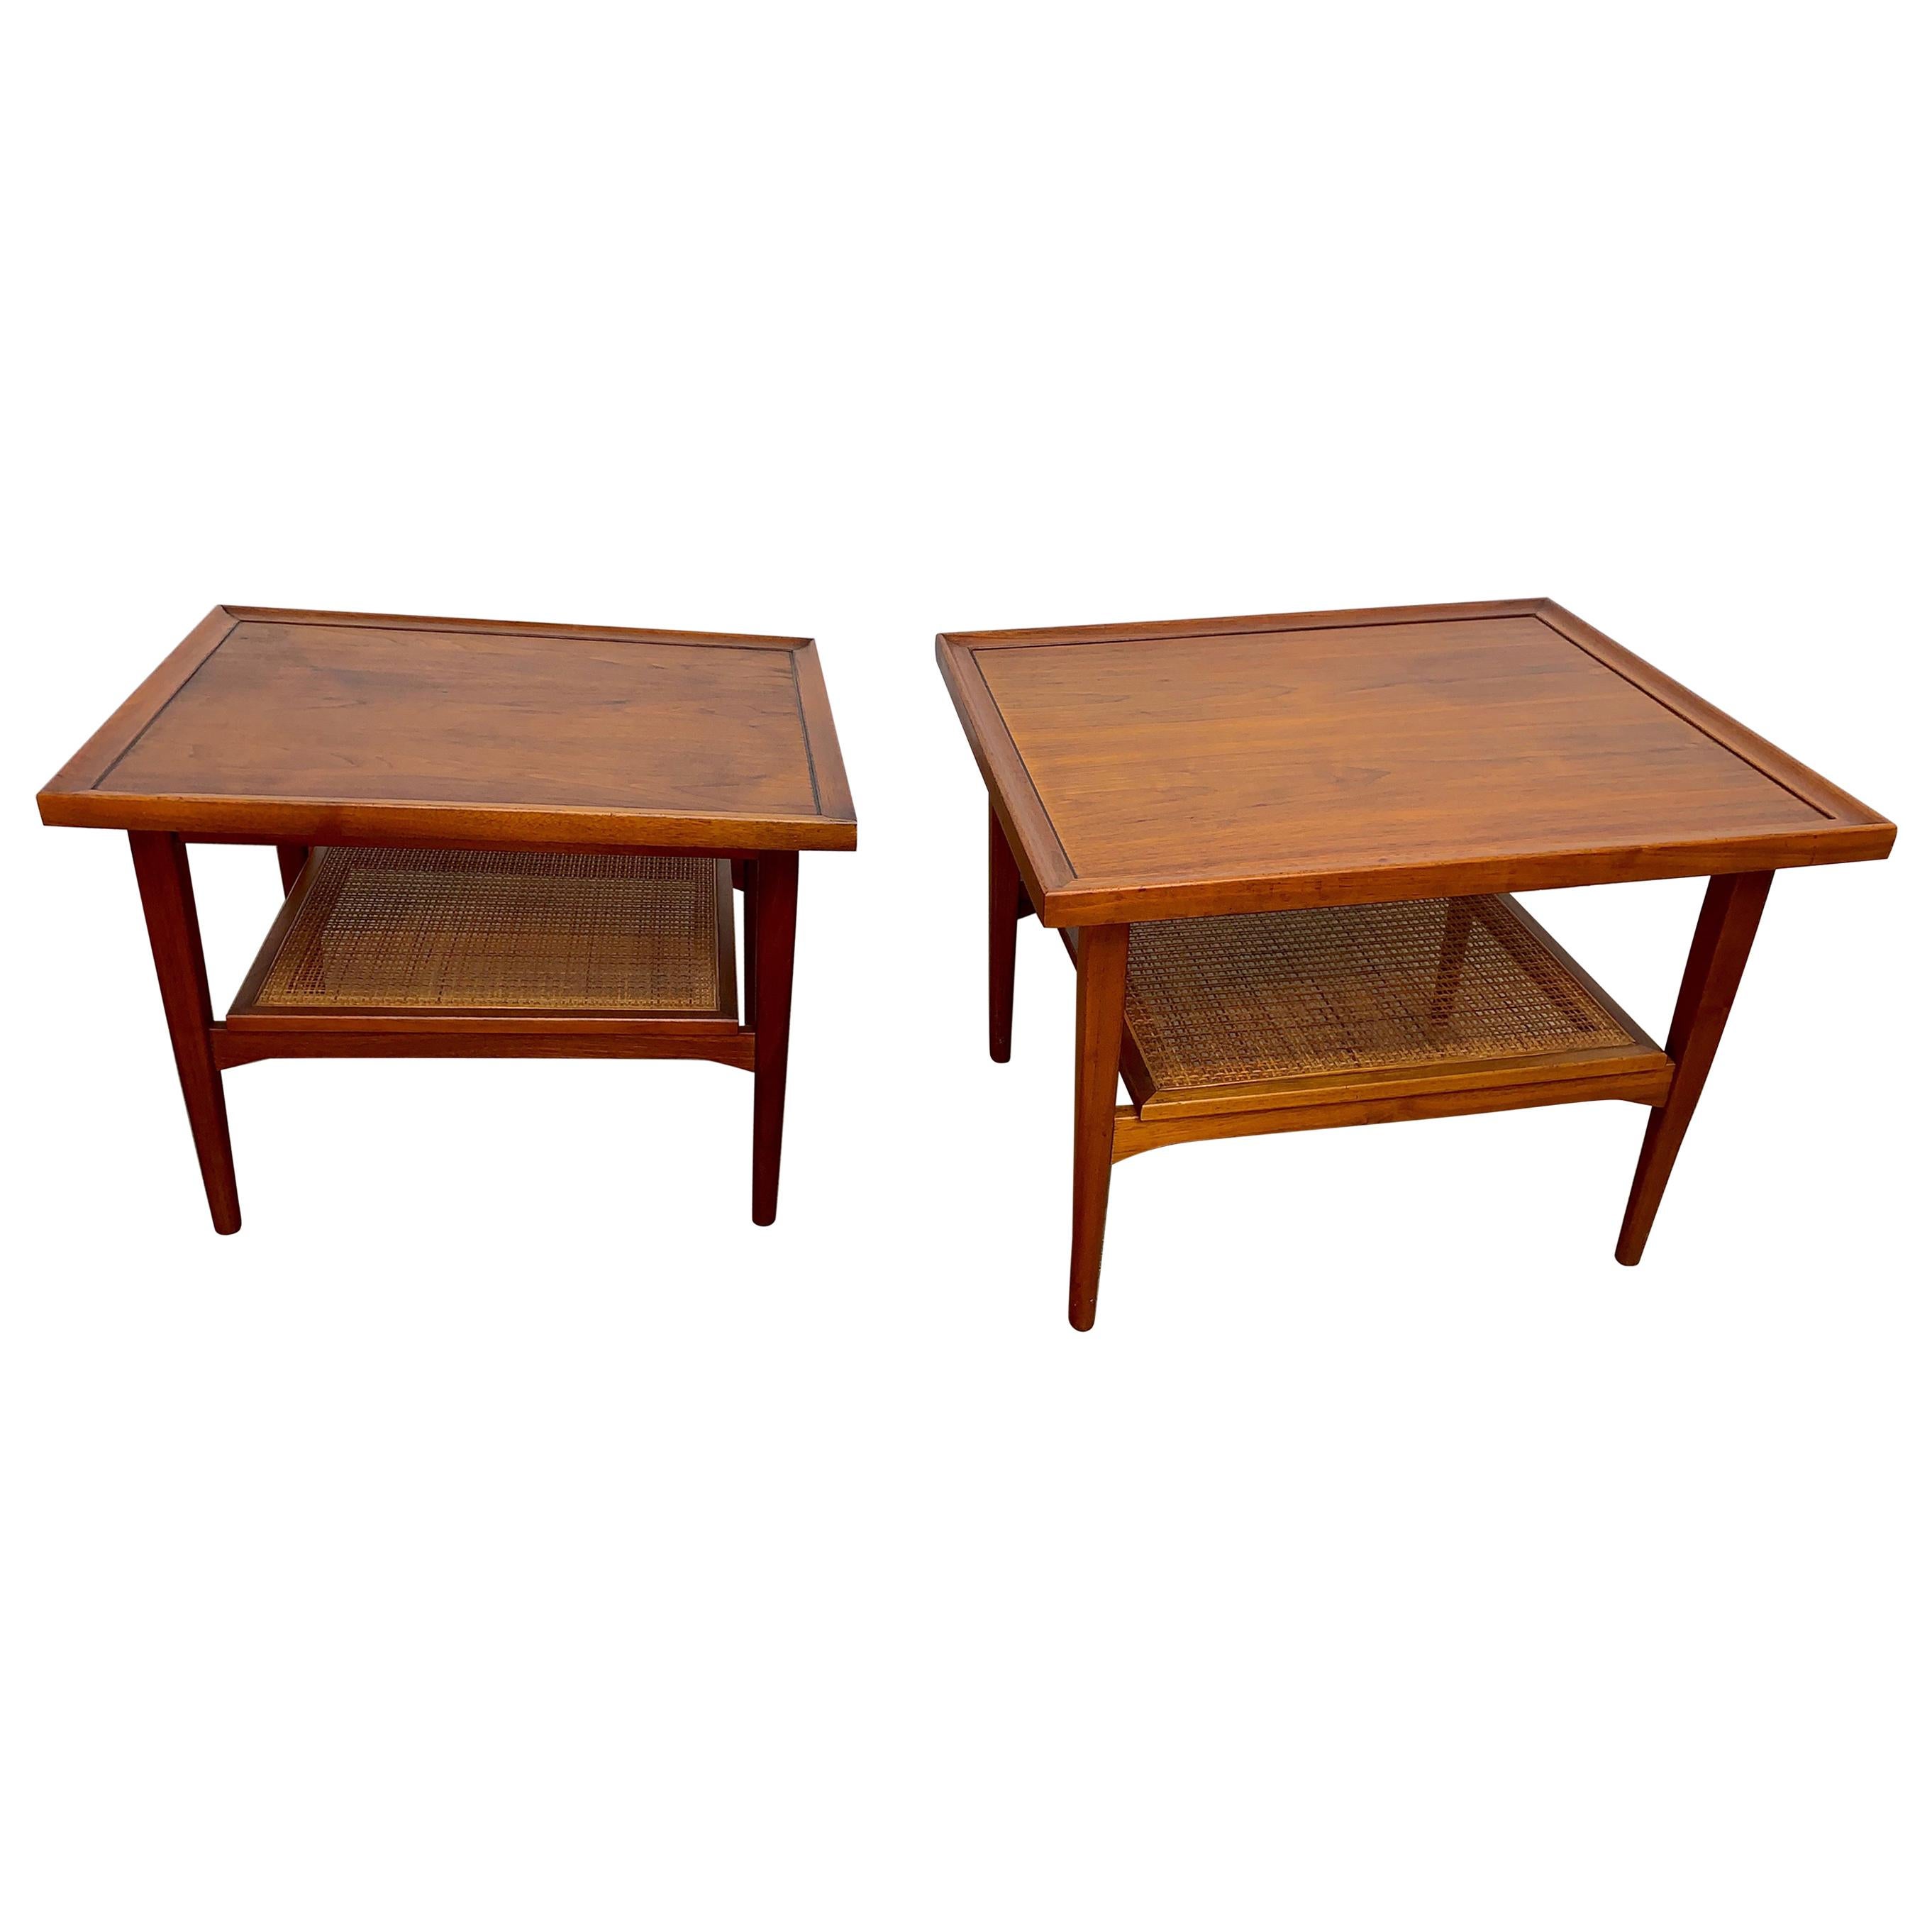 Beautiful American walnut with woven cane shelf end tables by Drexel Declaration.